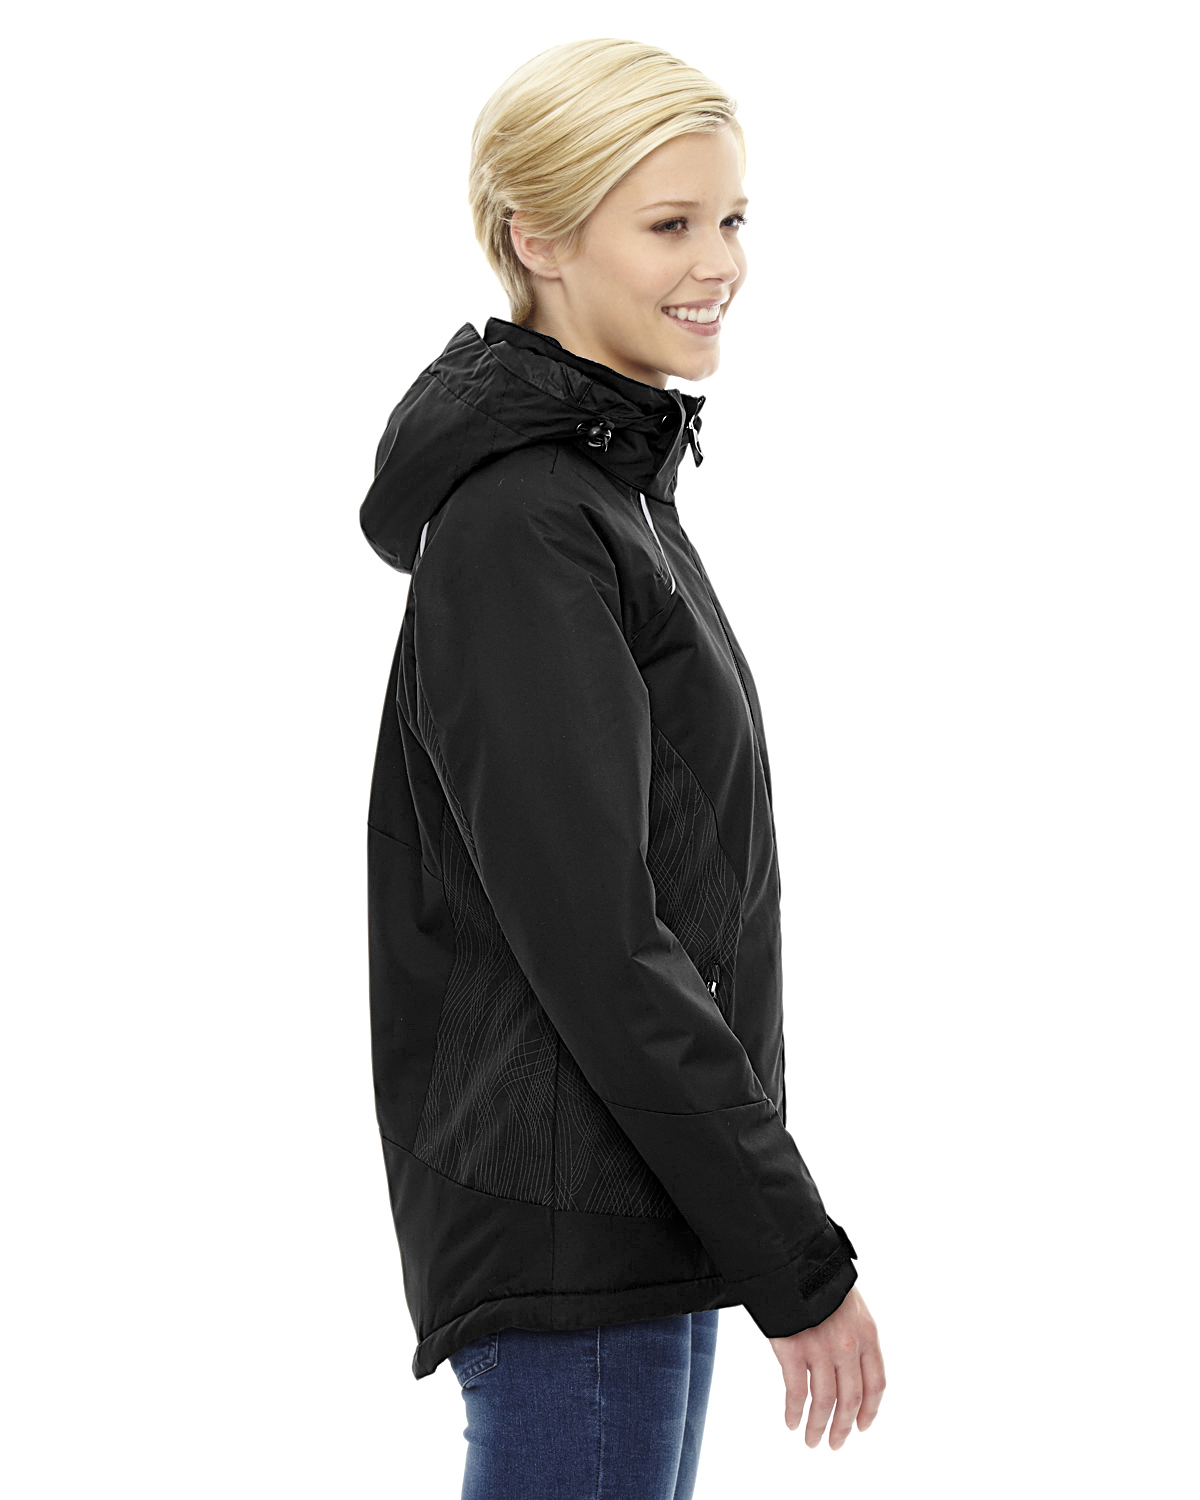 78197 North End Linear Insulated Jacket with Print